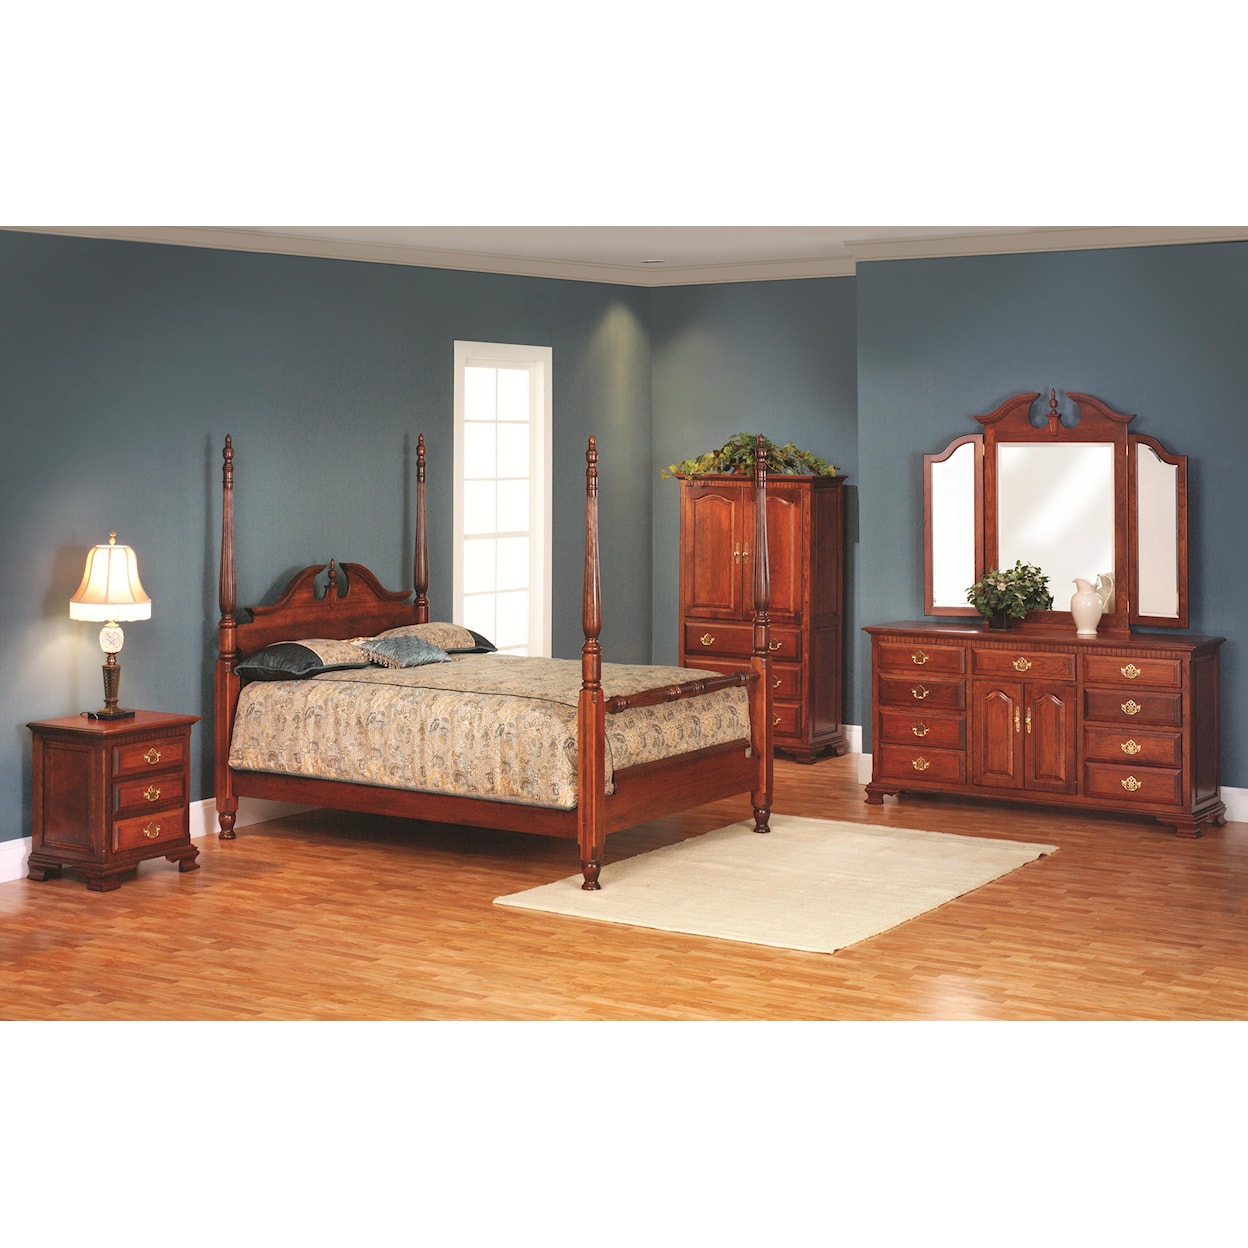 Millcraft Victorias Tradition King Poster Bedroom Group